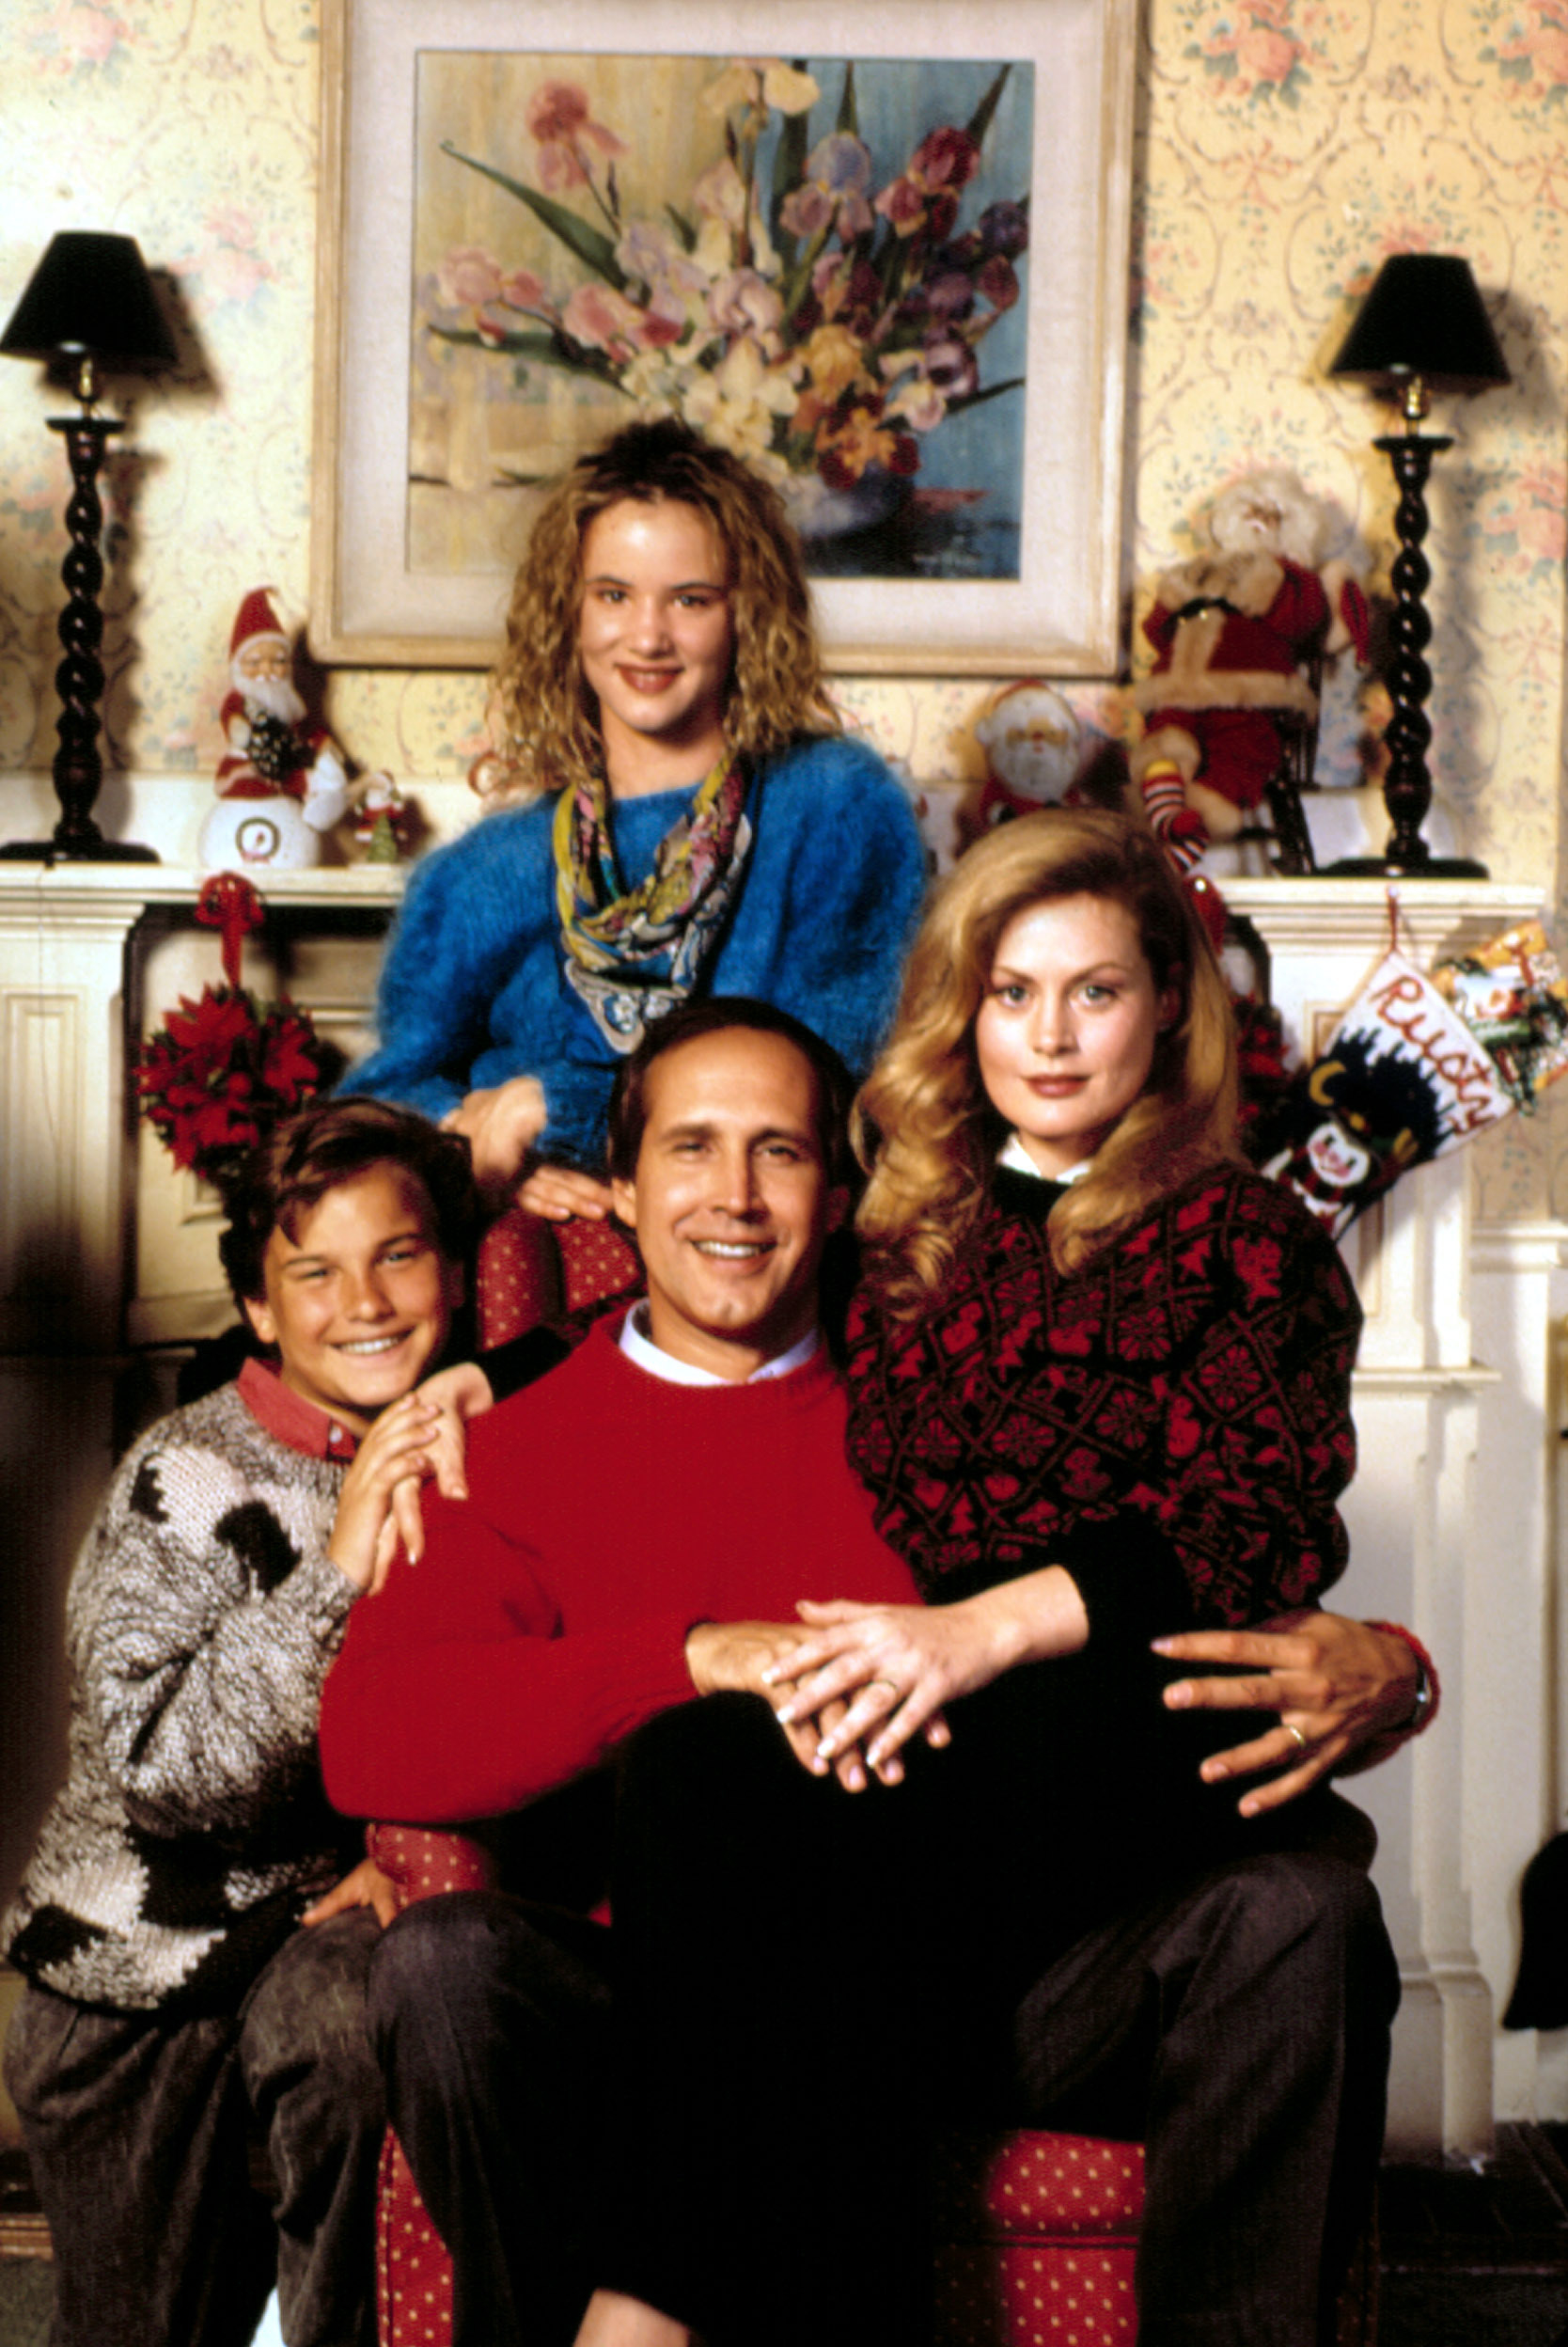 NATIONAL LAMPOON&#x27;S CHRISTMAS VACATION, Johnny Galecki, Juliette Lewis, Chevy Chase, Beverly D&#x27;Angelo, 1989